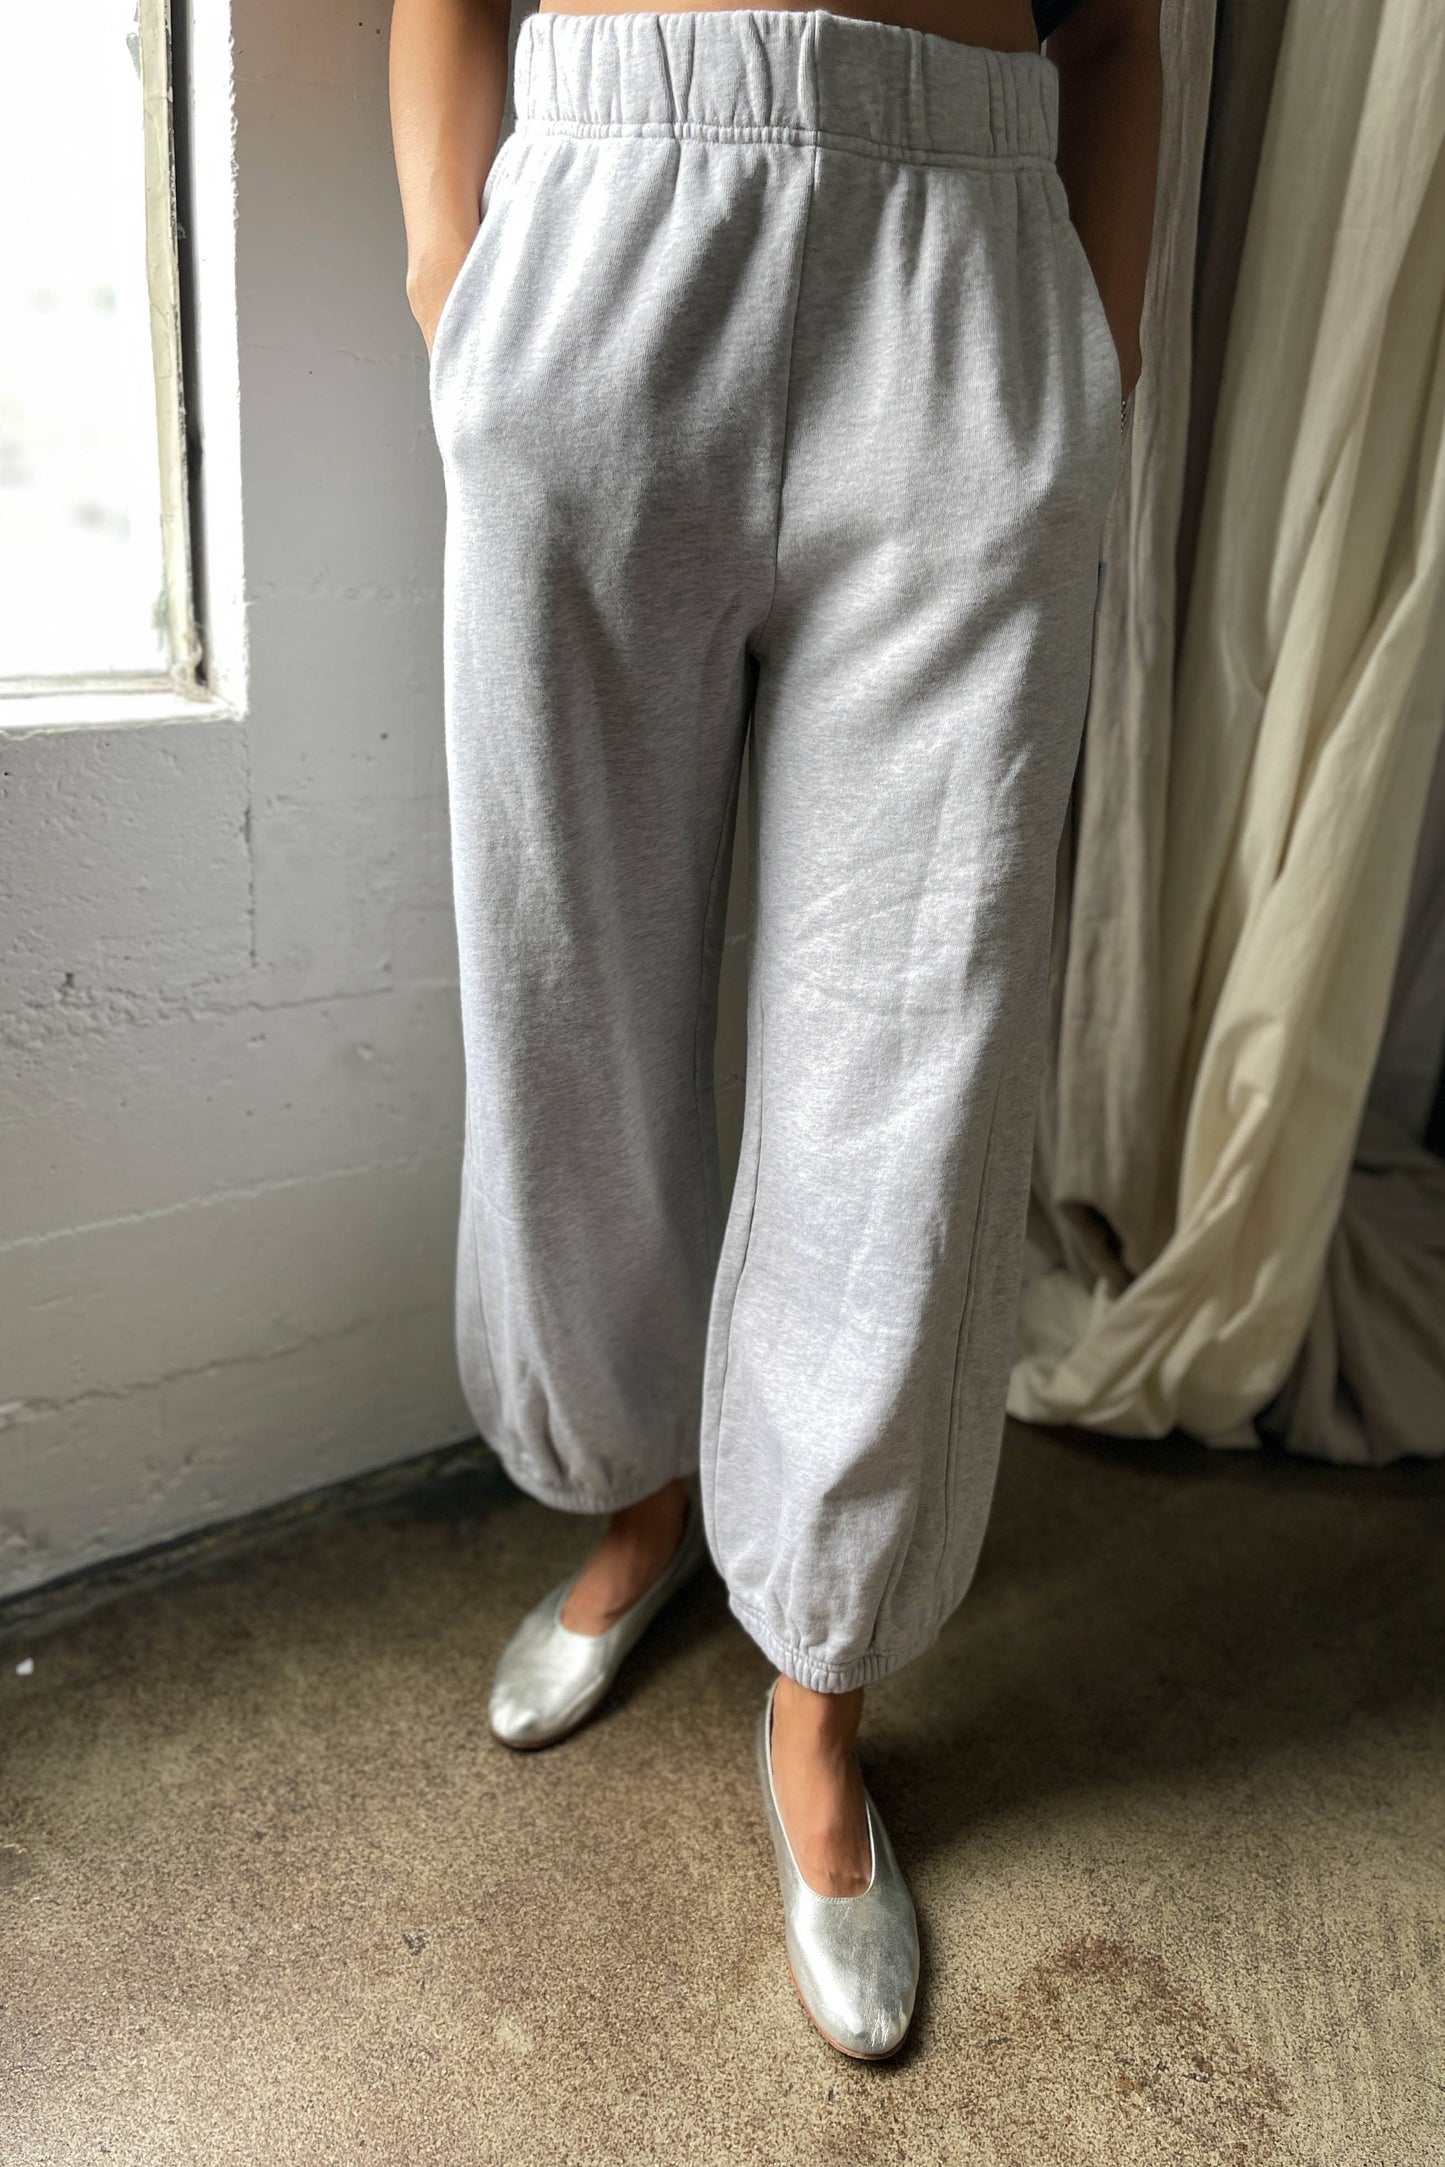 French Terry Balloon Pants - Light Ht. Grey